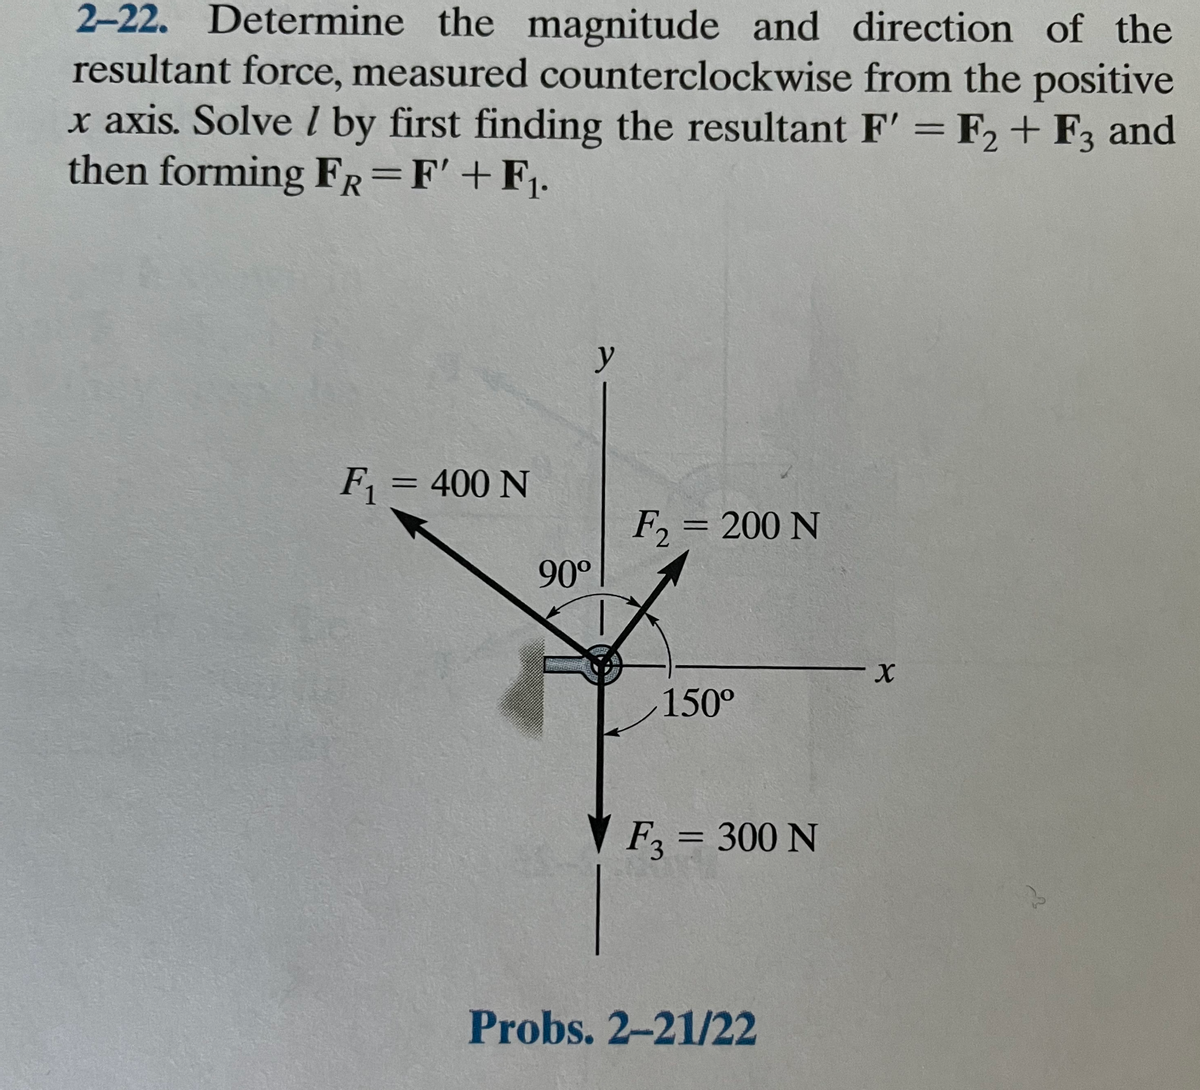 2-22. Determine the magnitude and direction of the
resultant force, measured counterclockwise from the positive
x axis. Solve 1 by first finding the resultant F' = F2 + F3 and
then forming FR=F' +F,.
%3D
y
F = 400 N
%3D
F, = 200 N
%3D
90°
150°
F3 = 300 N
%3D
Probs. 2-21/22
